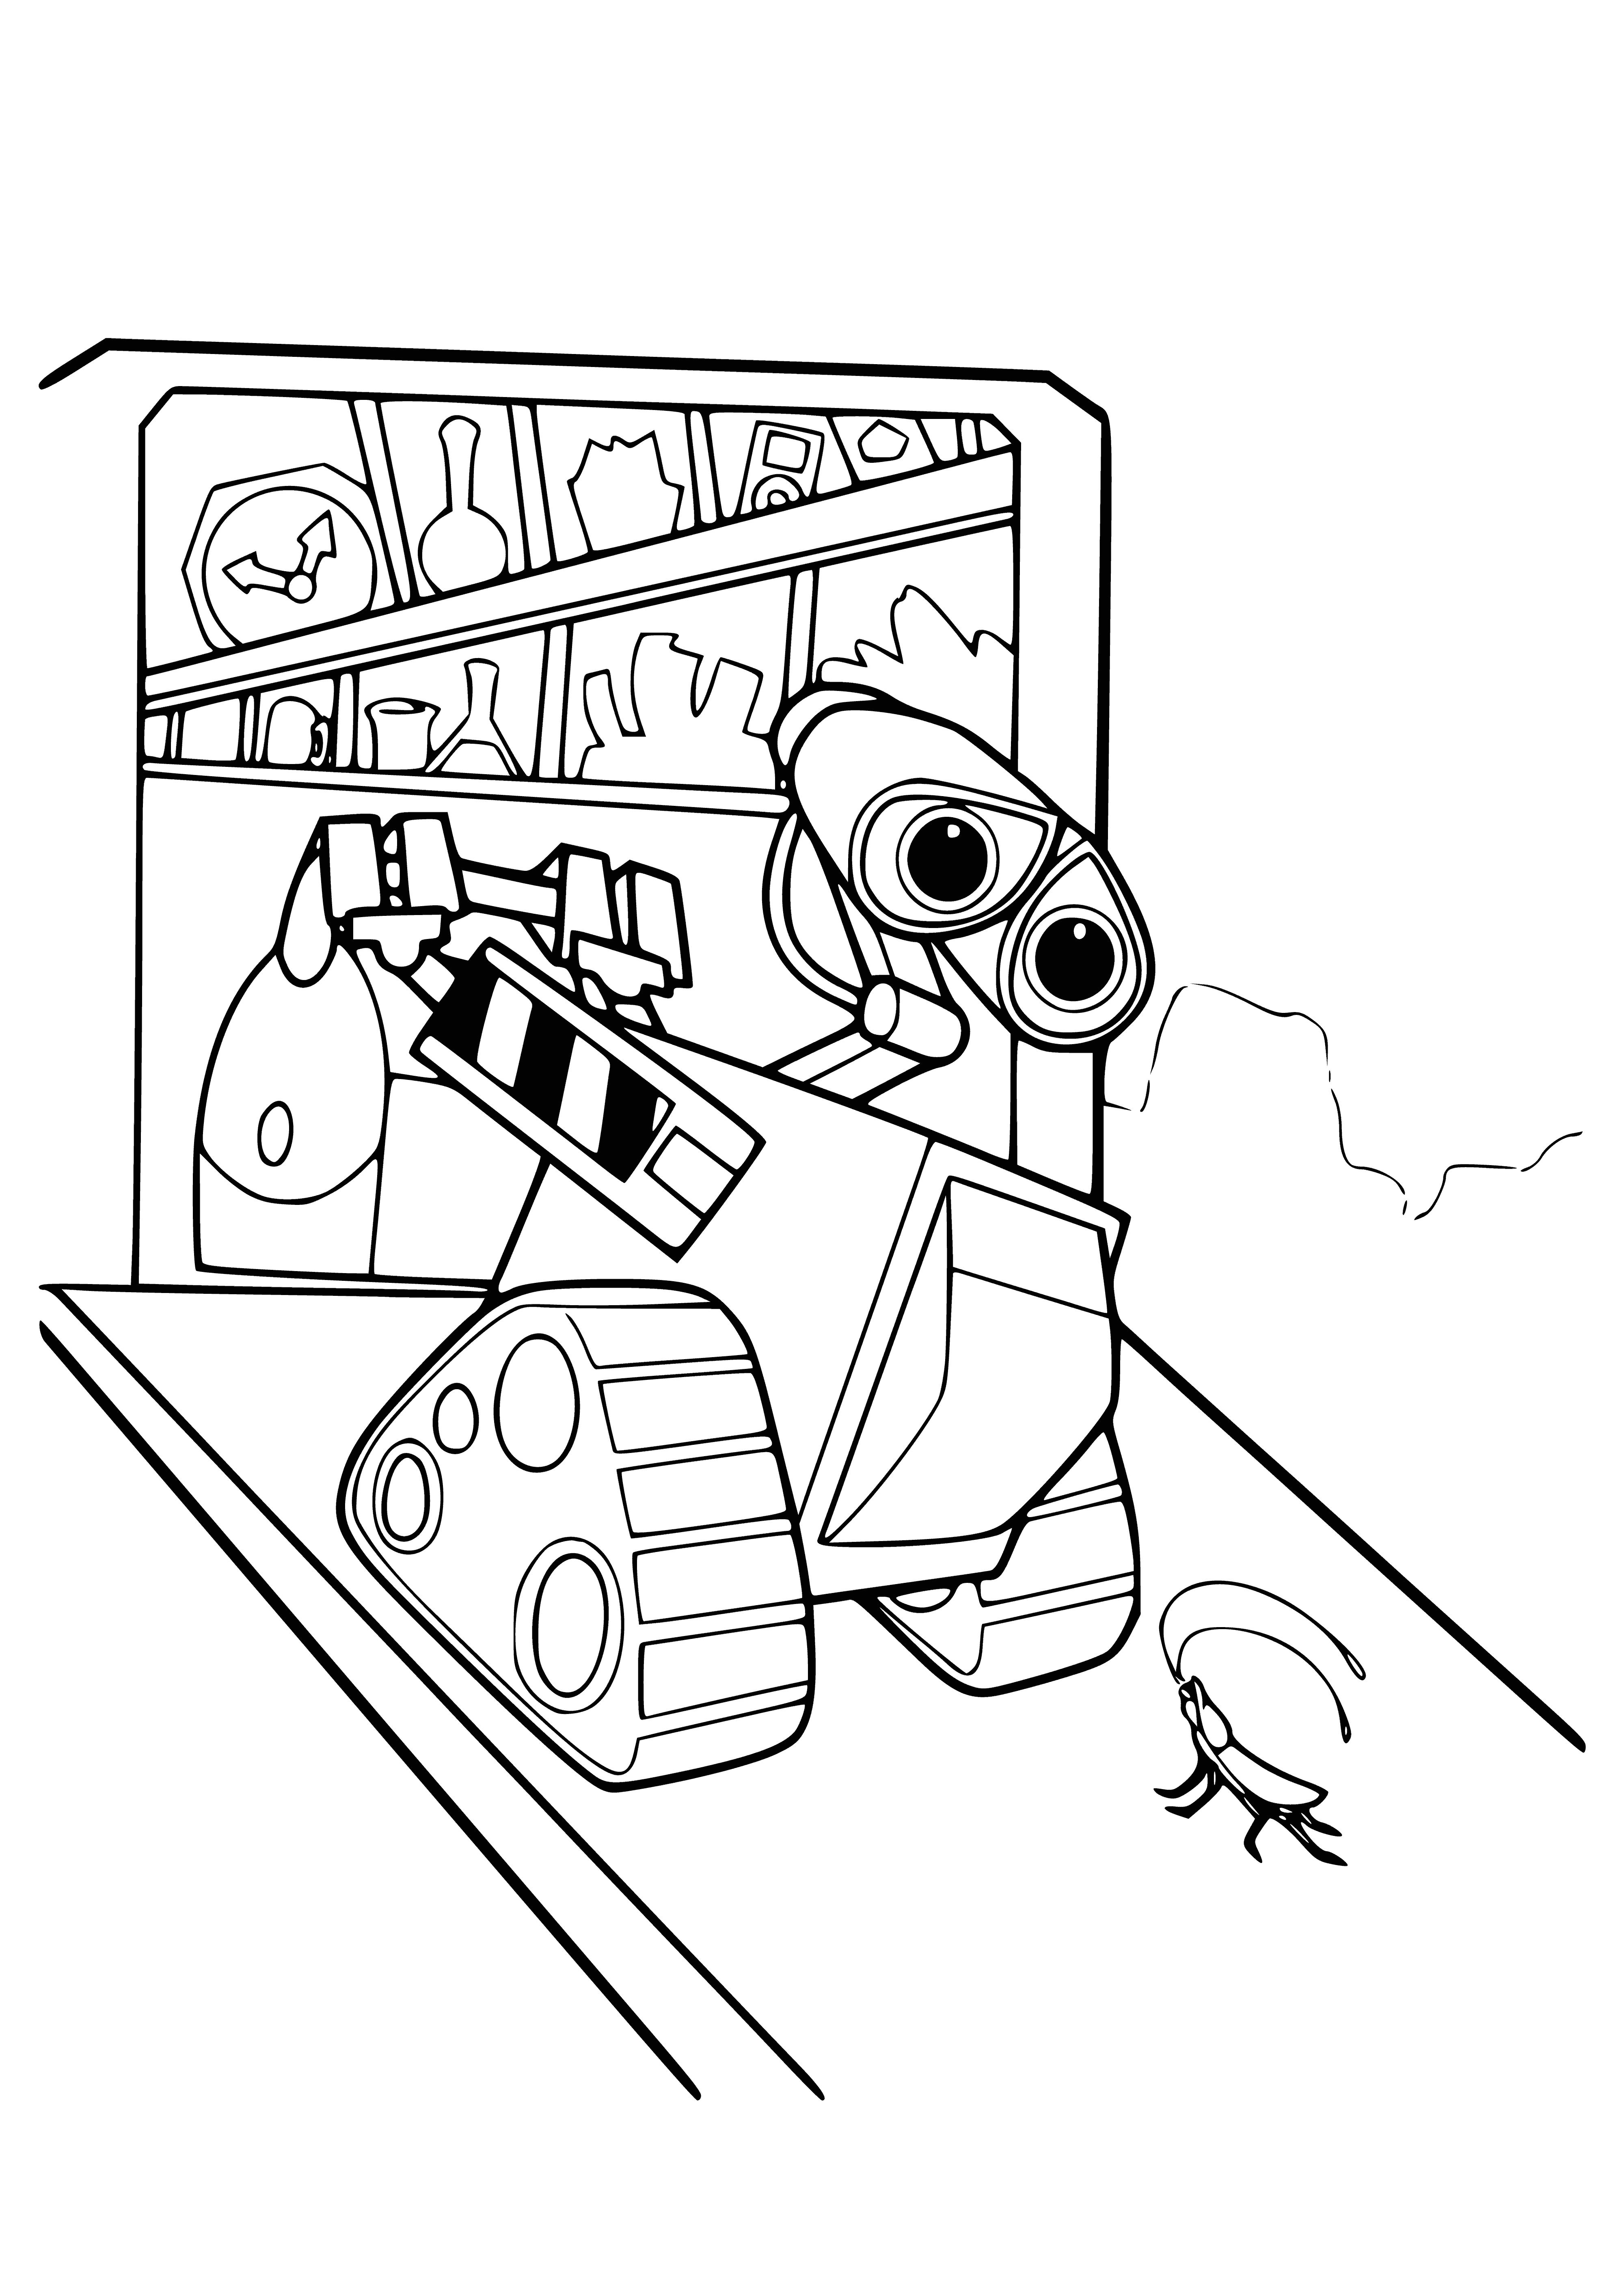 coloring page: Wall-e, a Robot with 2 eyes & 2 arms, explores a valley with a brown 6-legged cockroach in a coloring page.